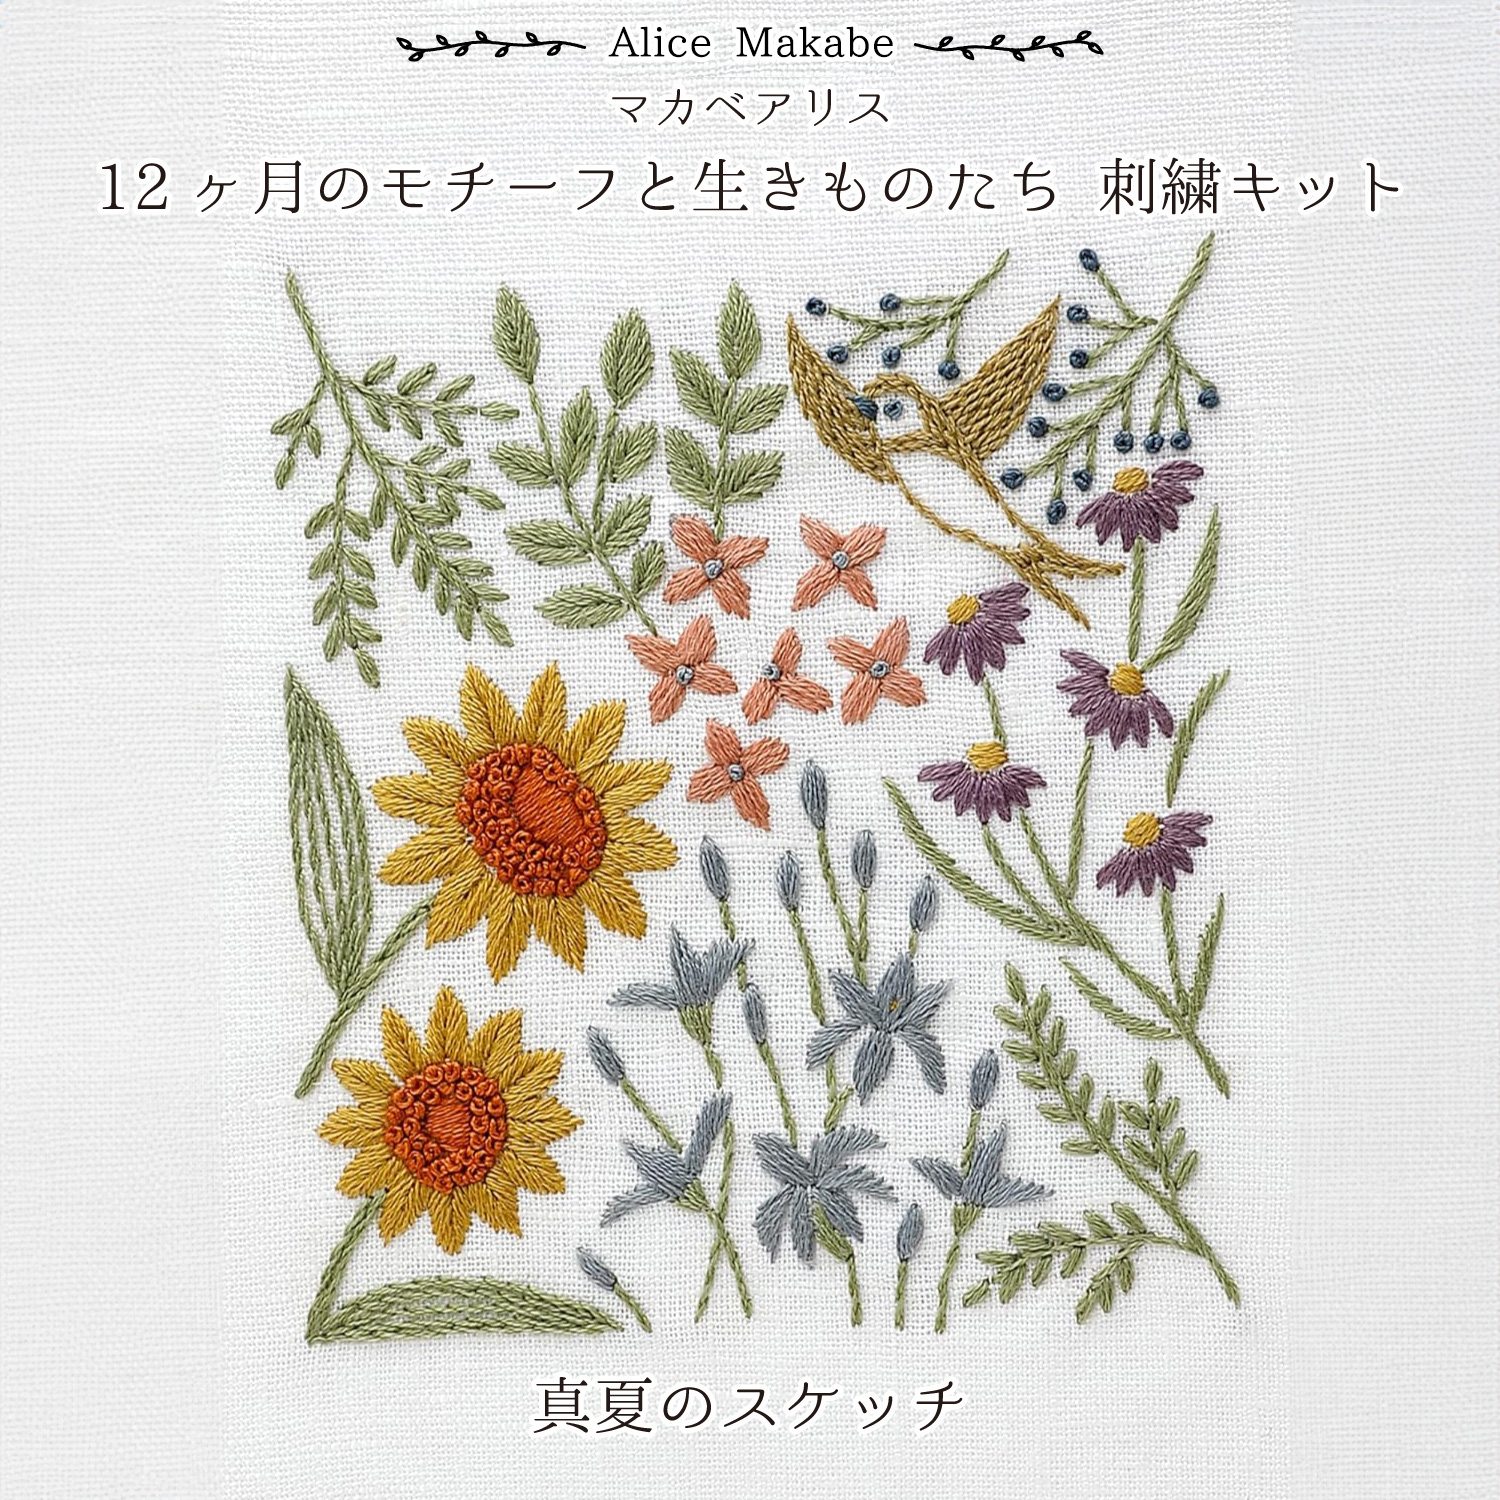 DMC-JPT58 Embroidery kit, Alice Makabe, 12 months motif and creatures (bag)